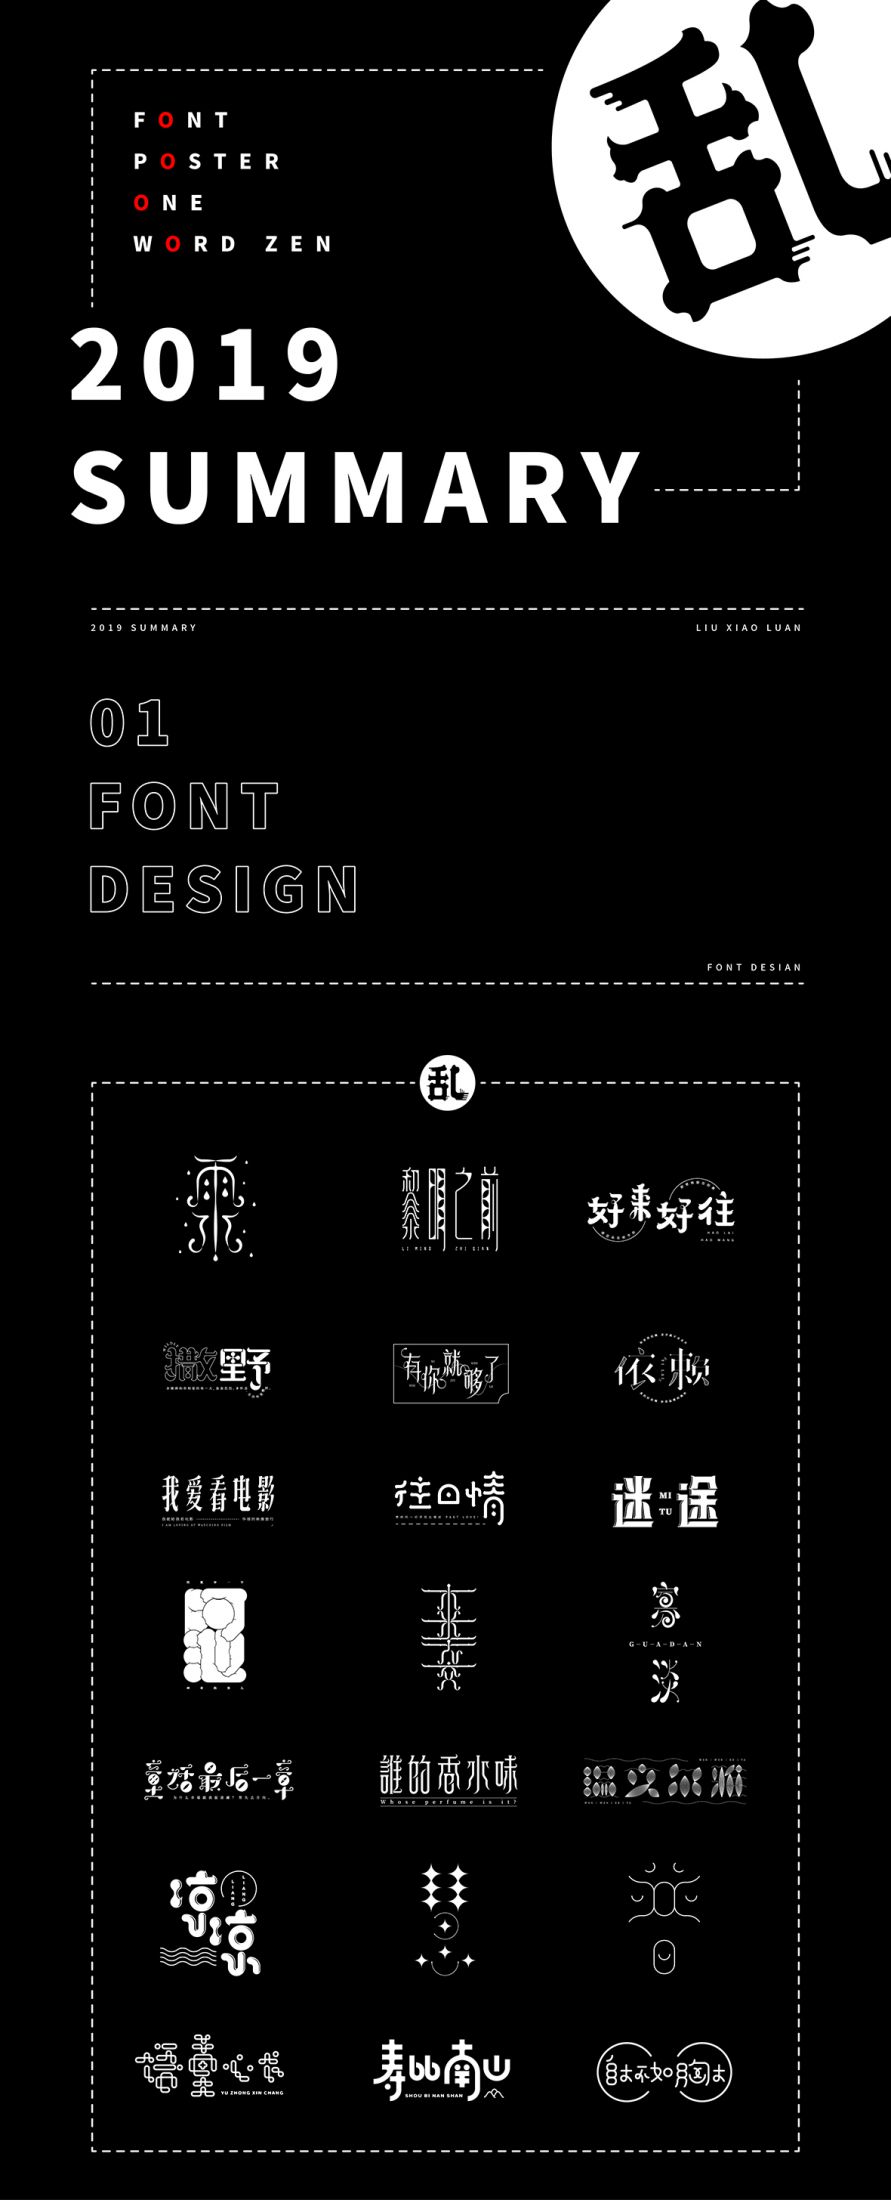 Annual Summary of 2019 Font Design-Thank you for your support all along